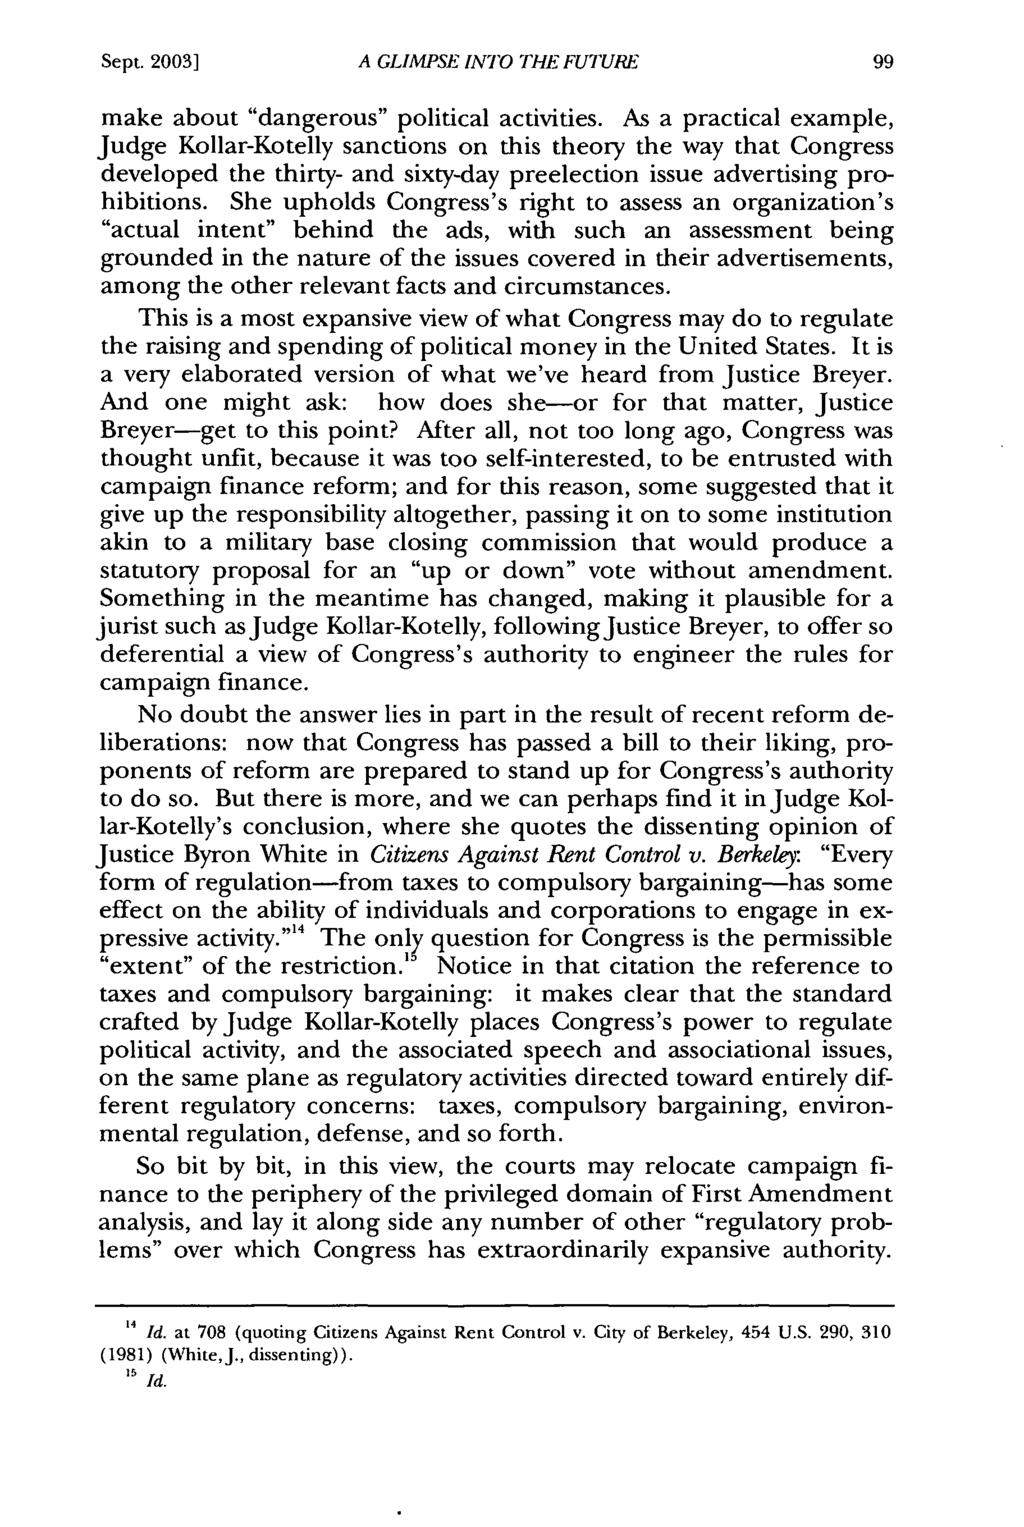 Sept. 2003] A GLIMPSE INTO THE FUTURE make about "dangerous" political activities.